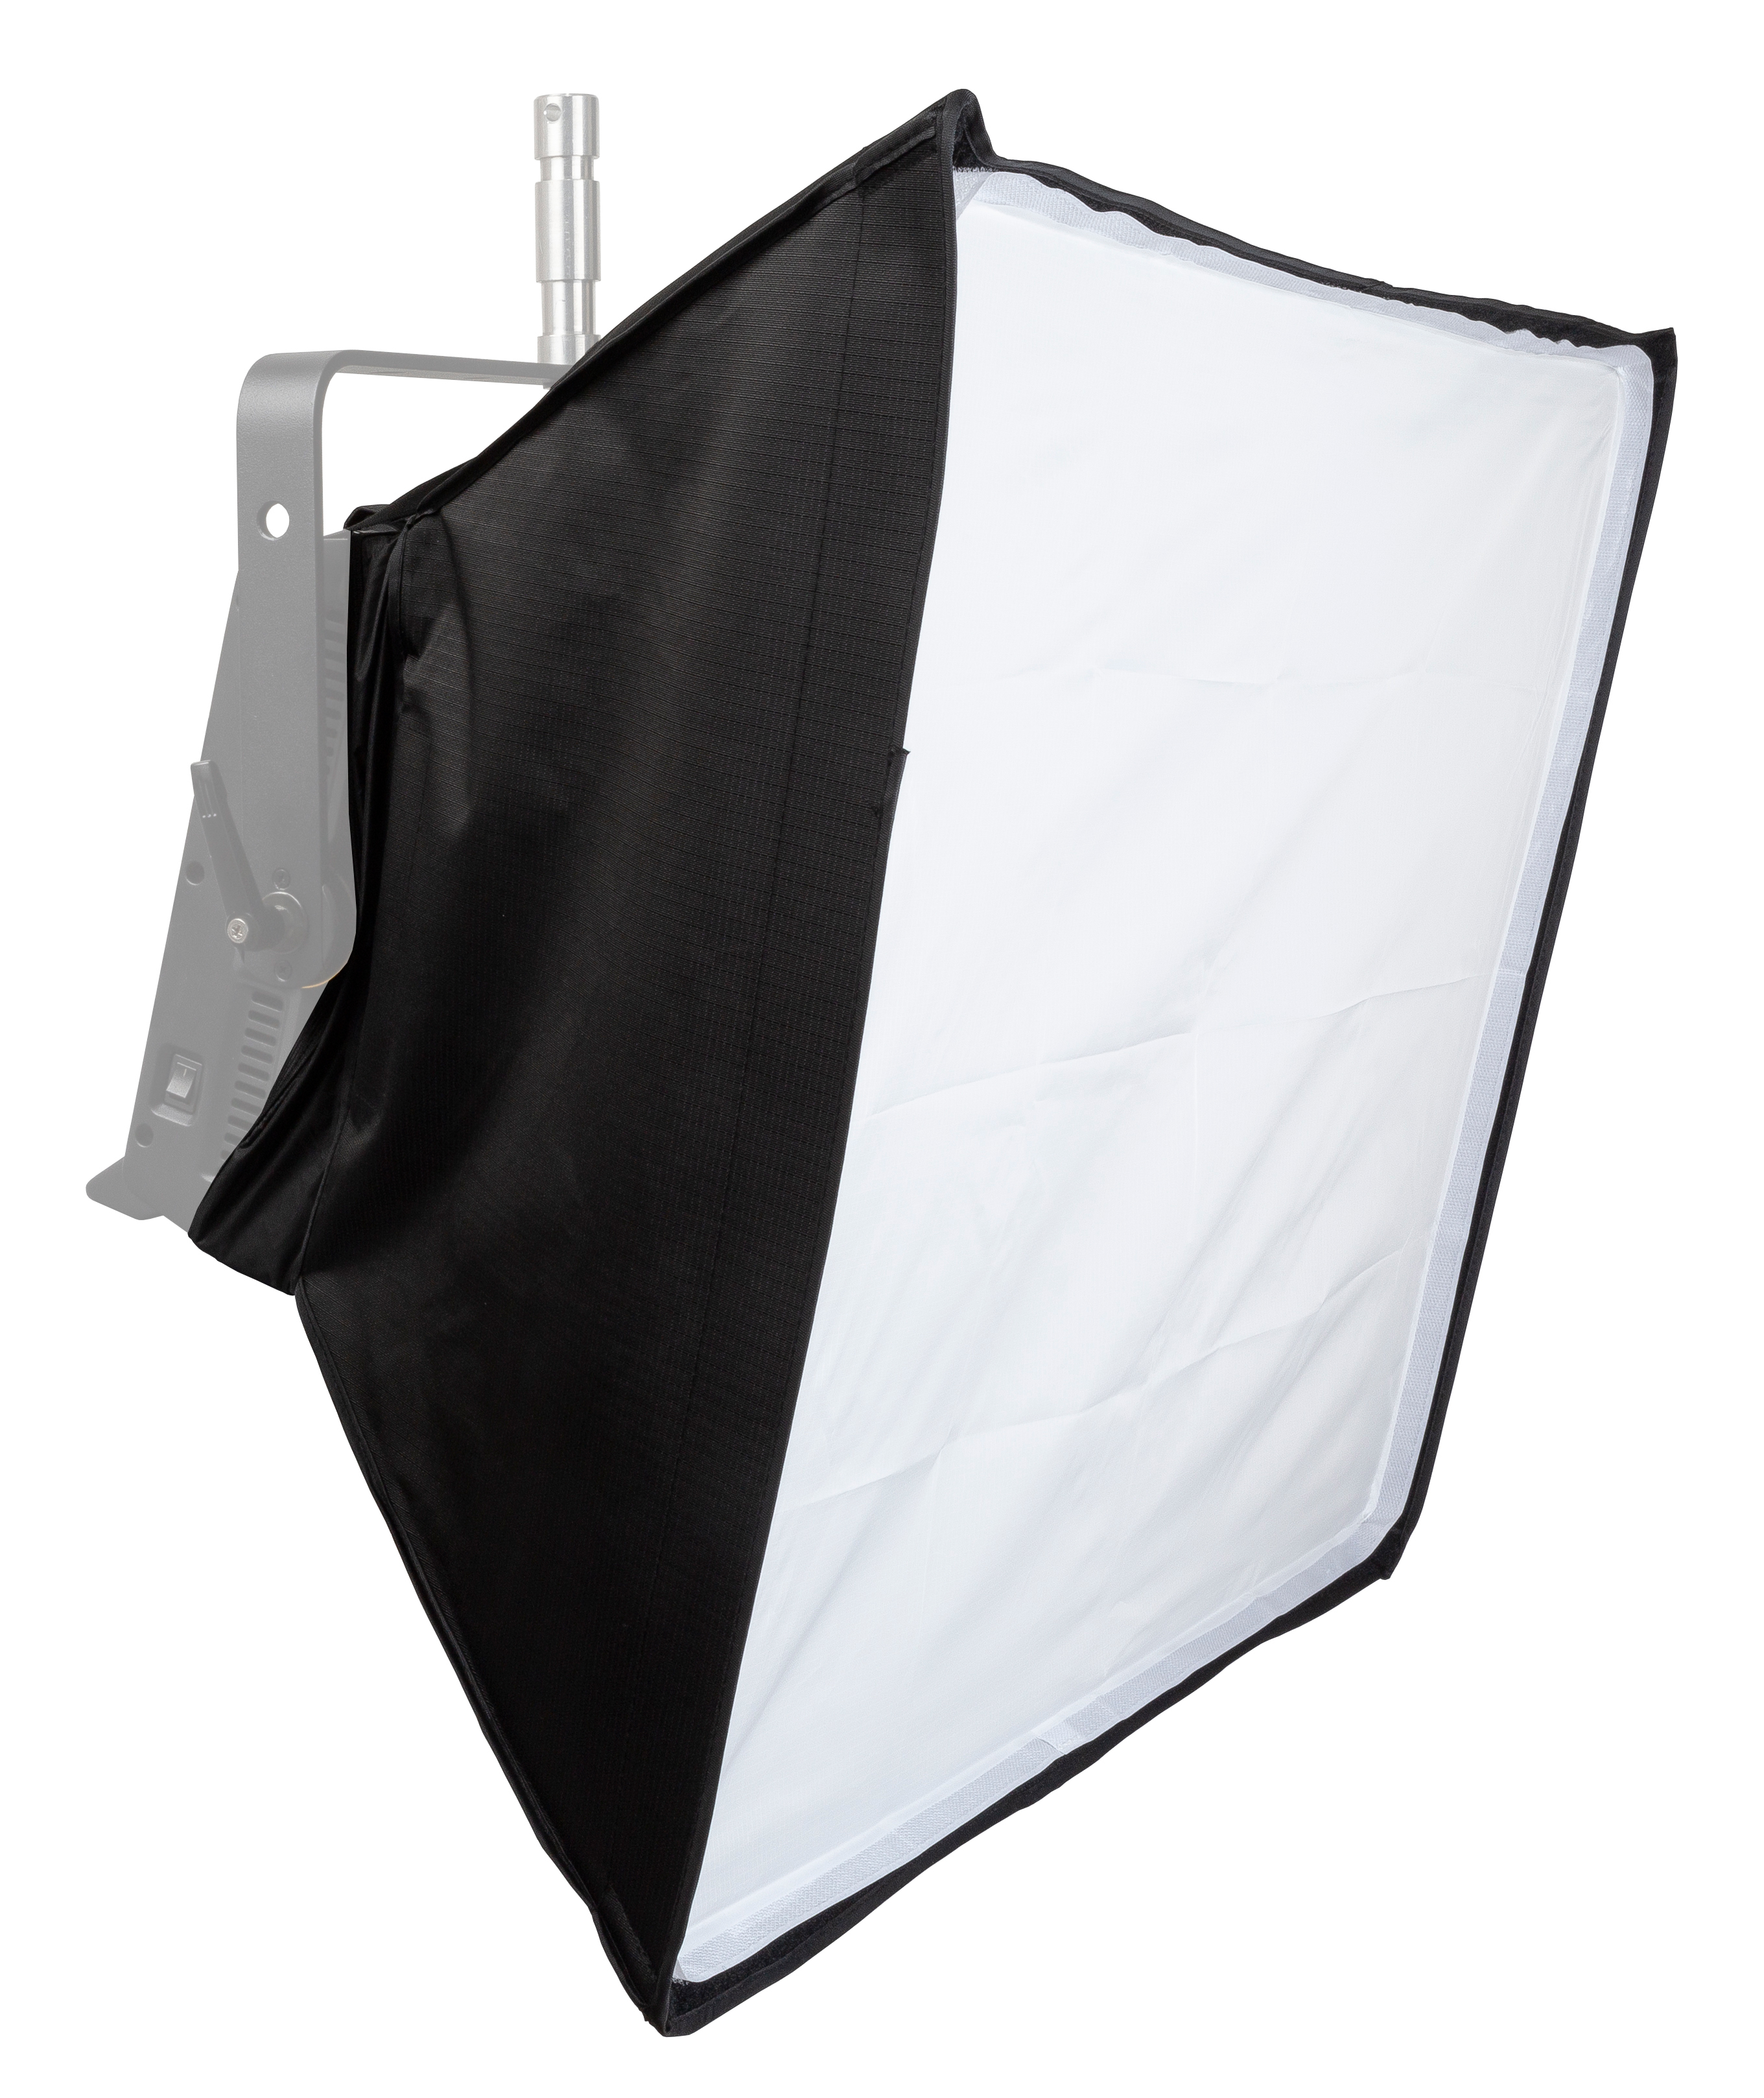 This soft box is used to soften the light and minimize harsh shadows while making video recordings or taking pictures